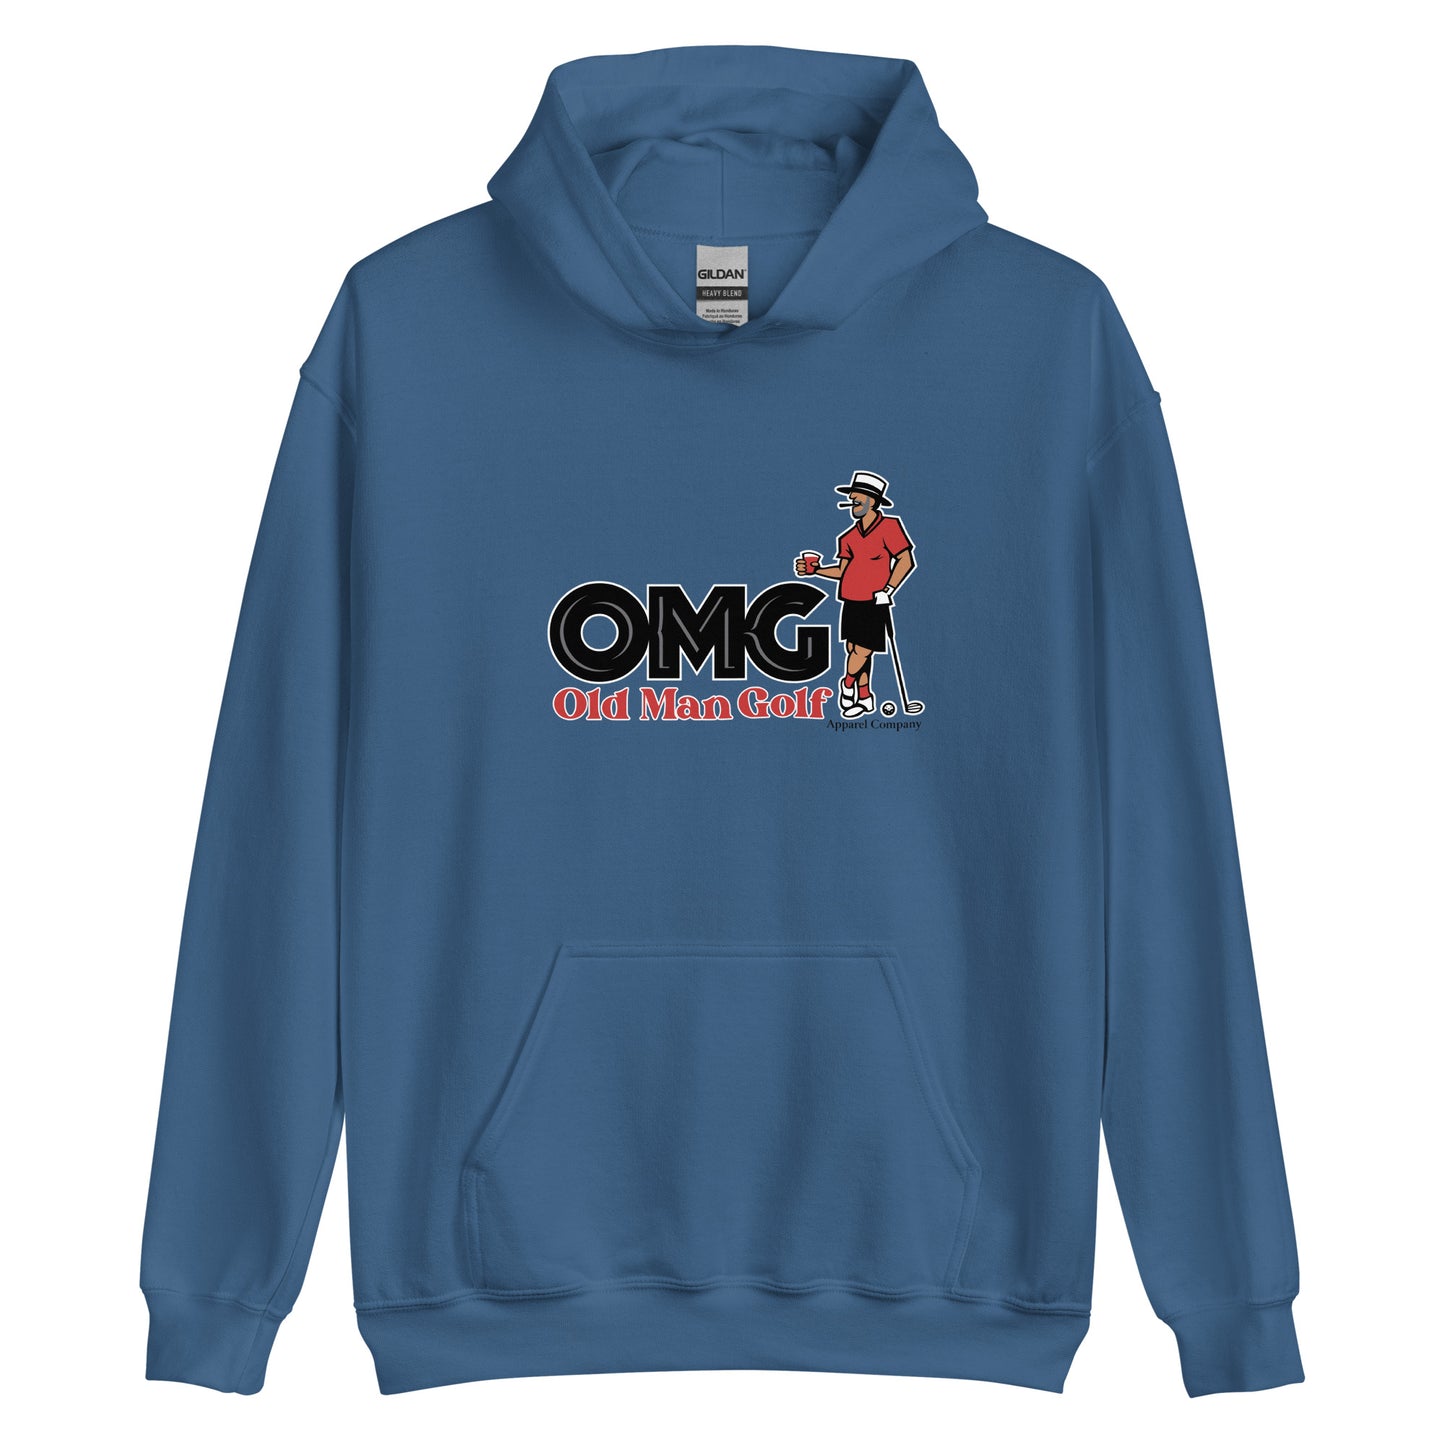 Our OMG sweatshirt for the comfort seekers!